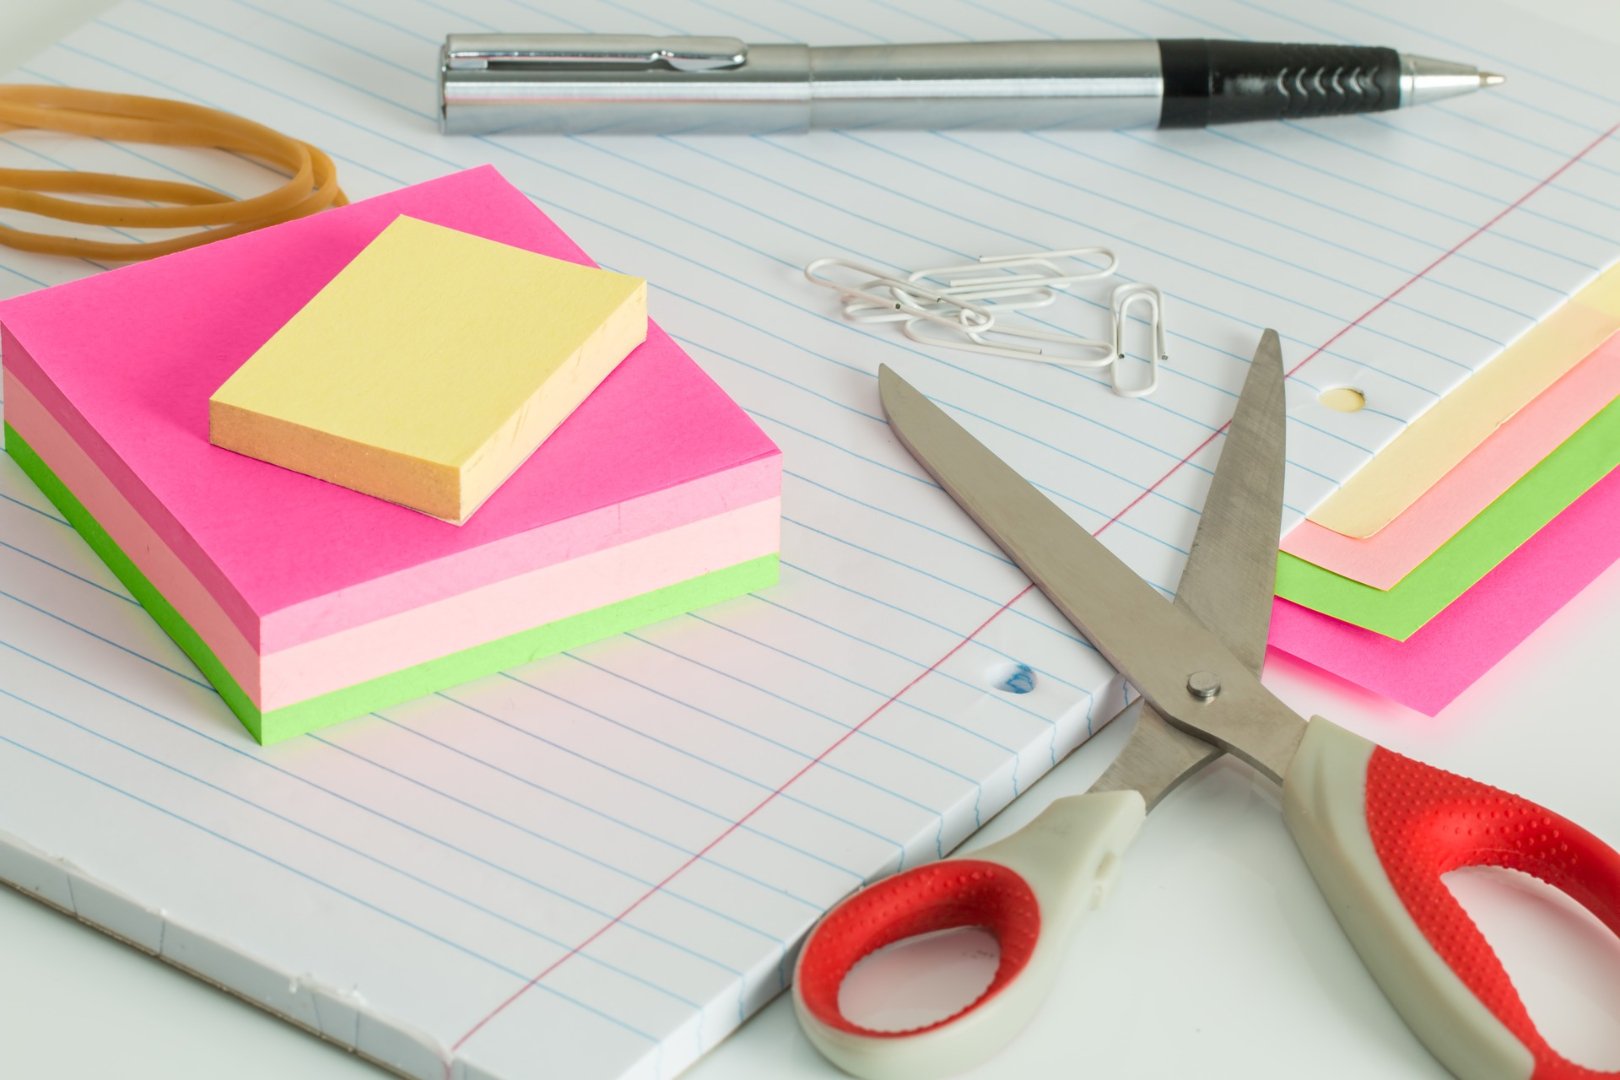 post-its, loose leaf, paper clips and scissors on desk